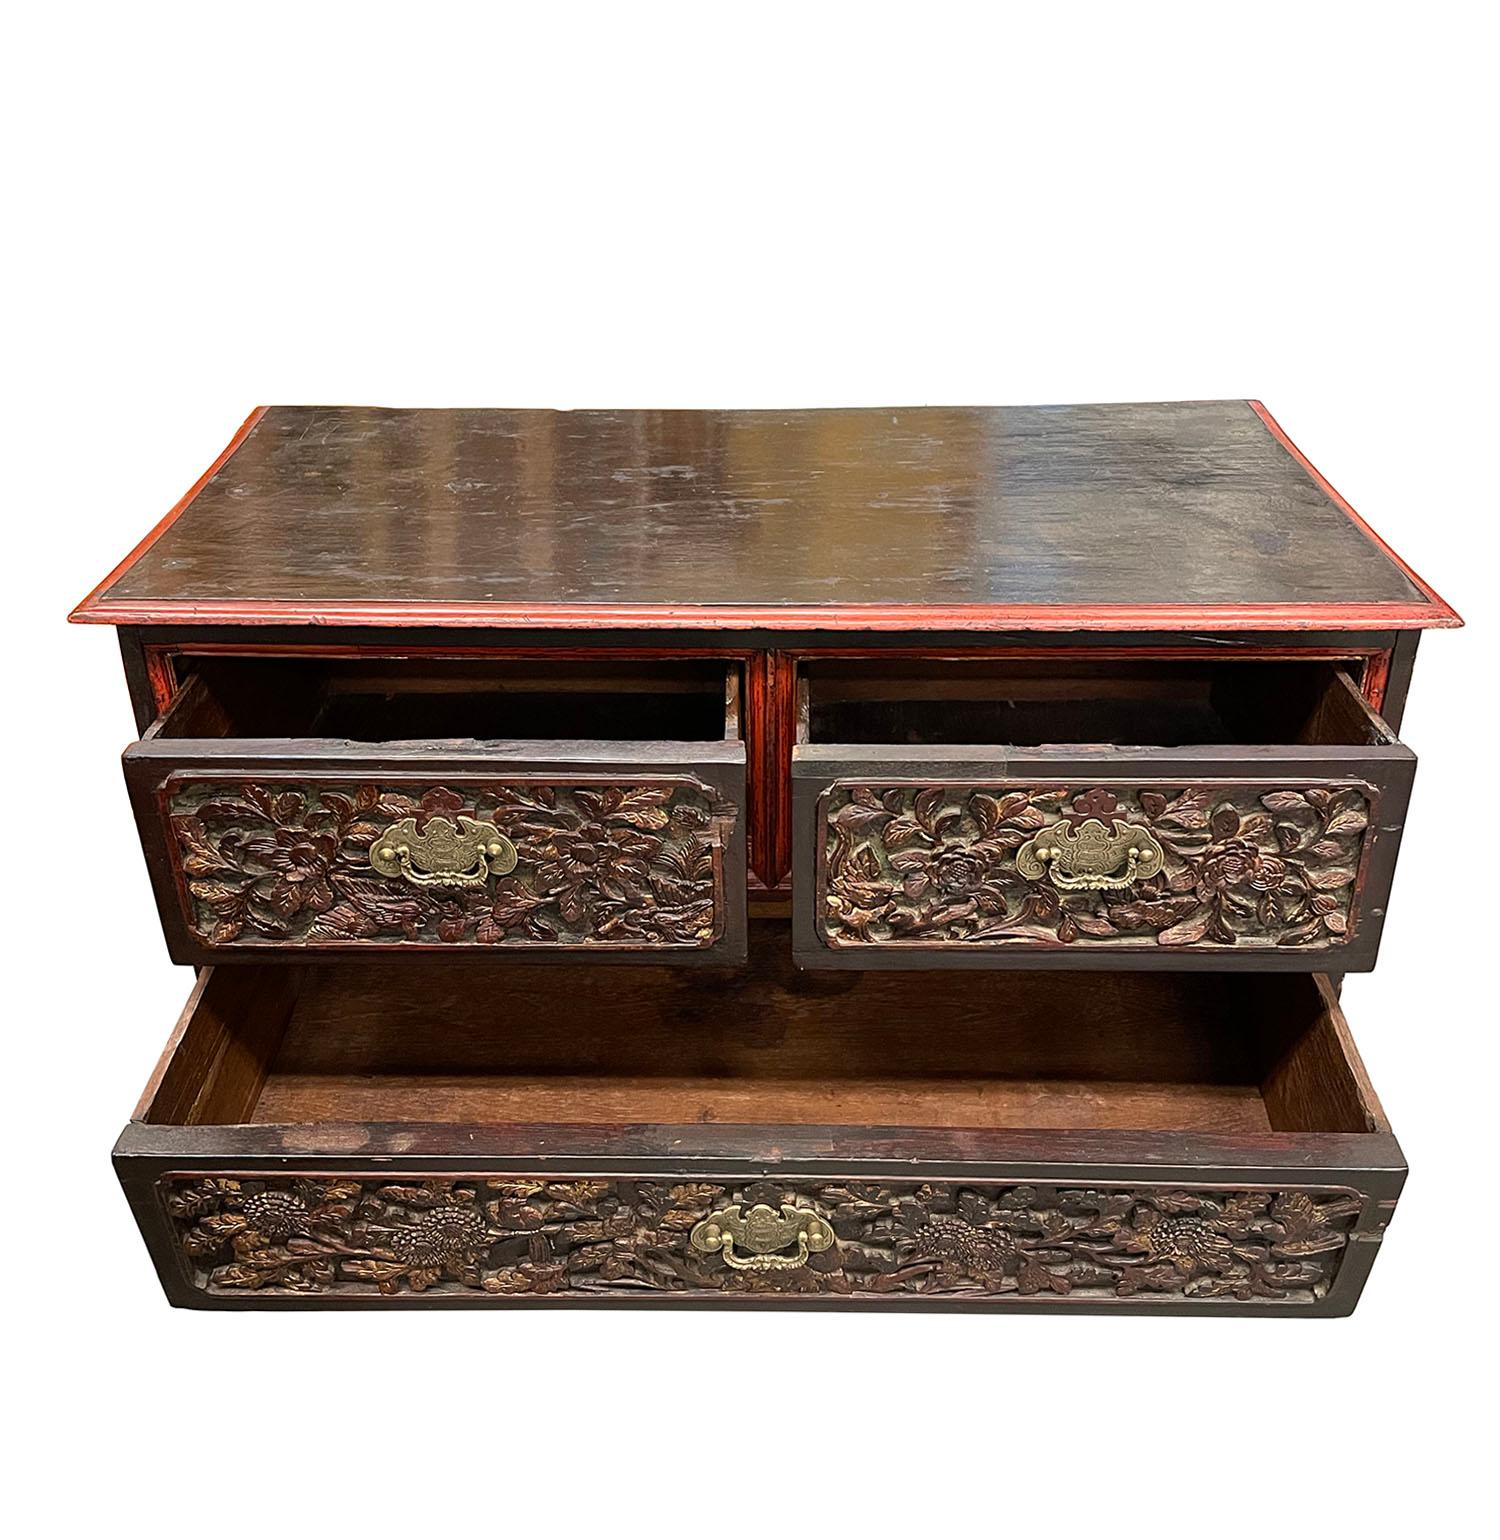 Chinese Export 19th Century Antique Chinese Massive Carved Teak Wood Coffee Table, End Table